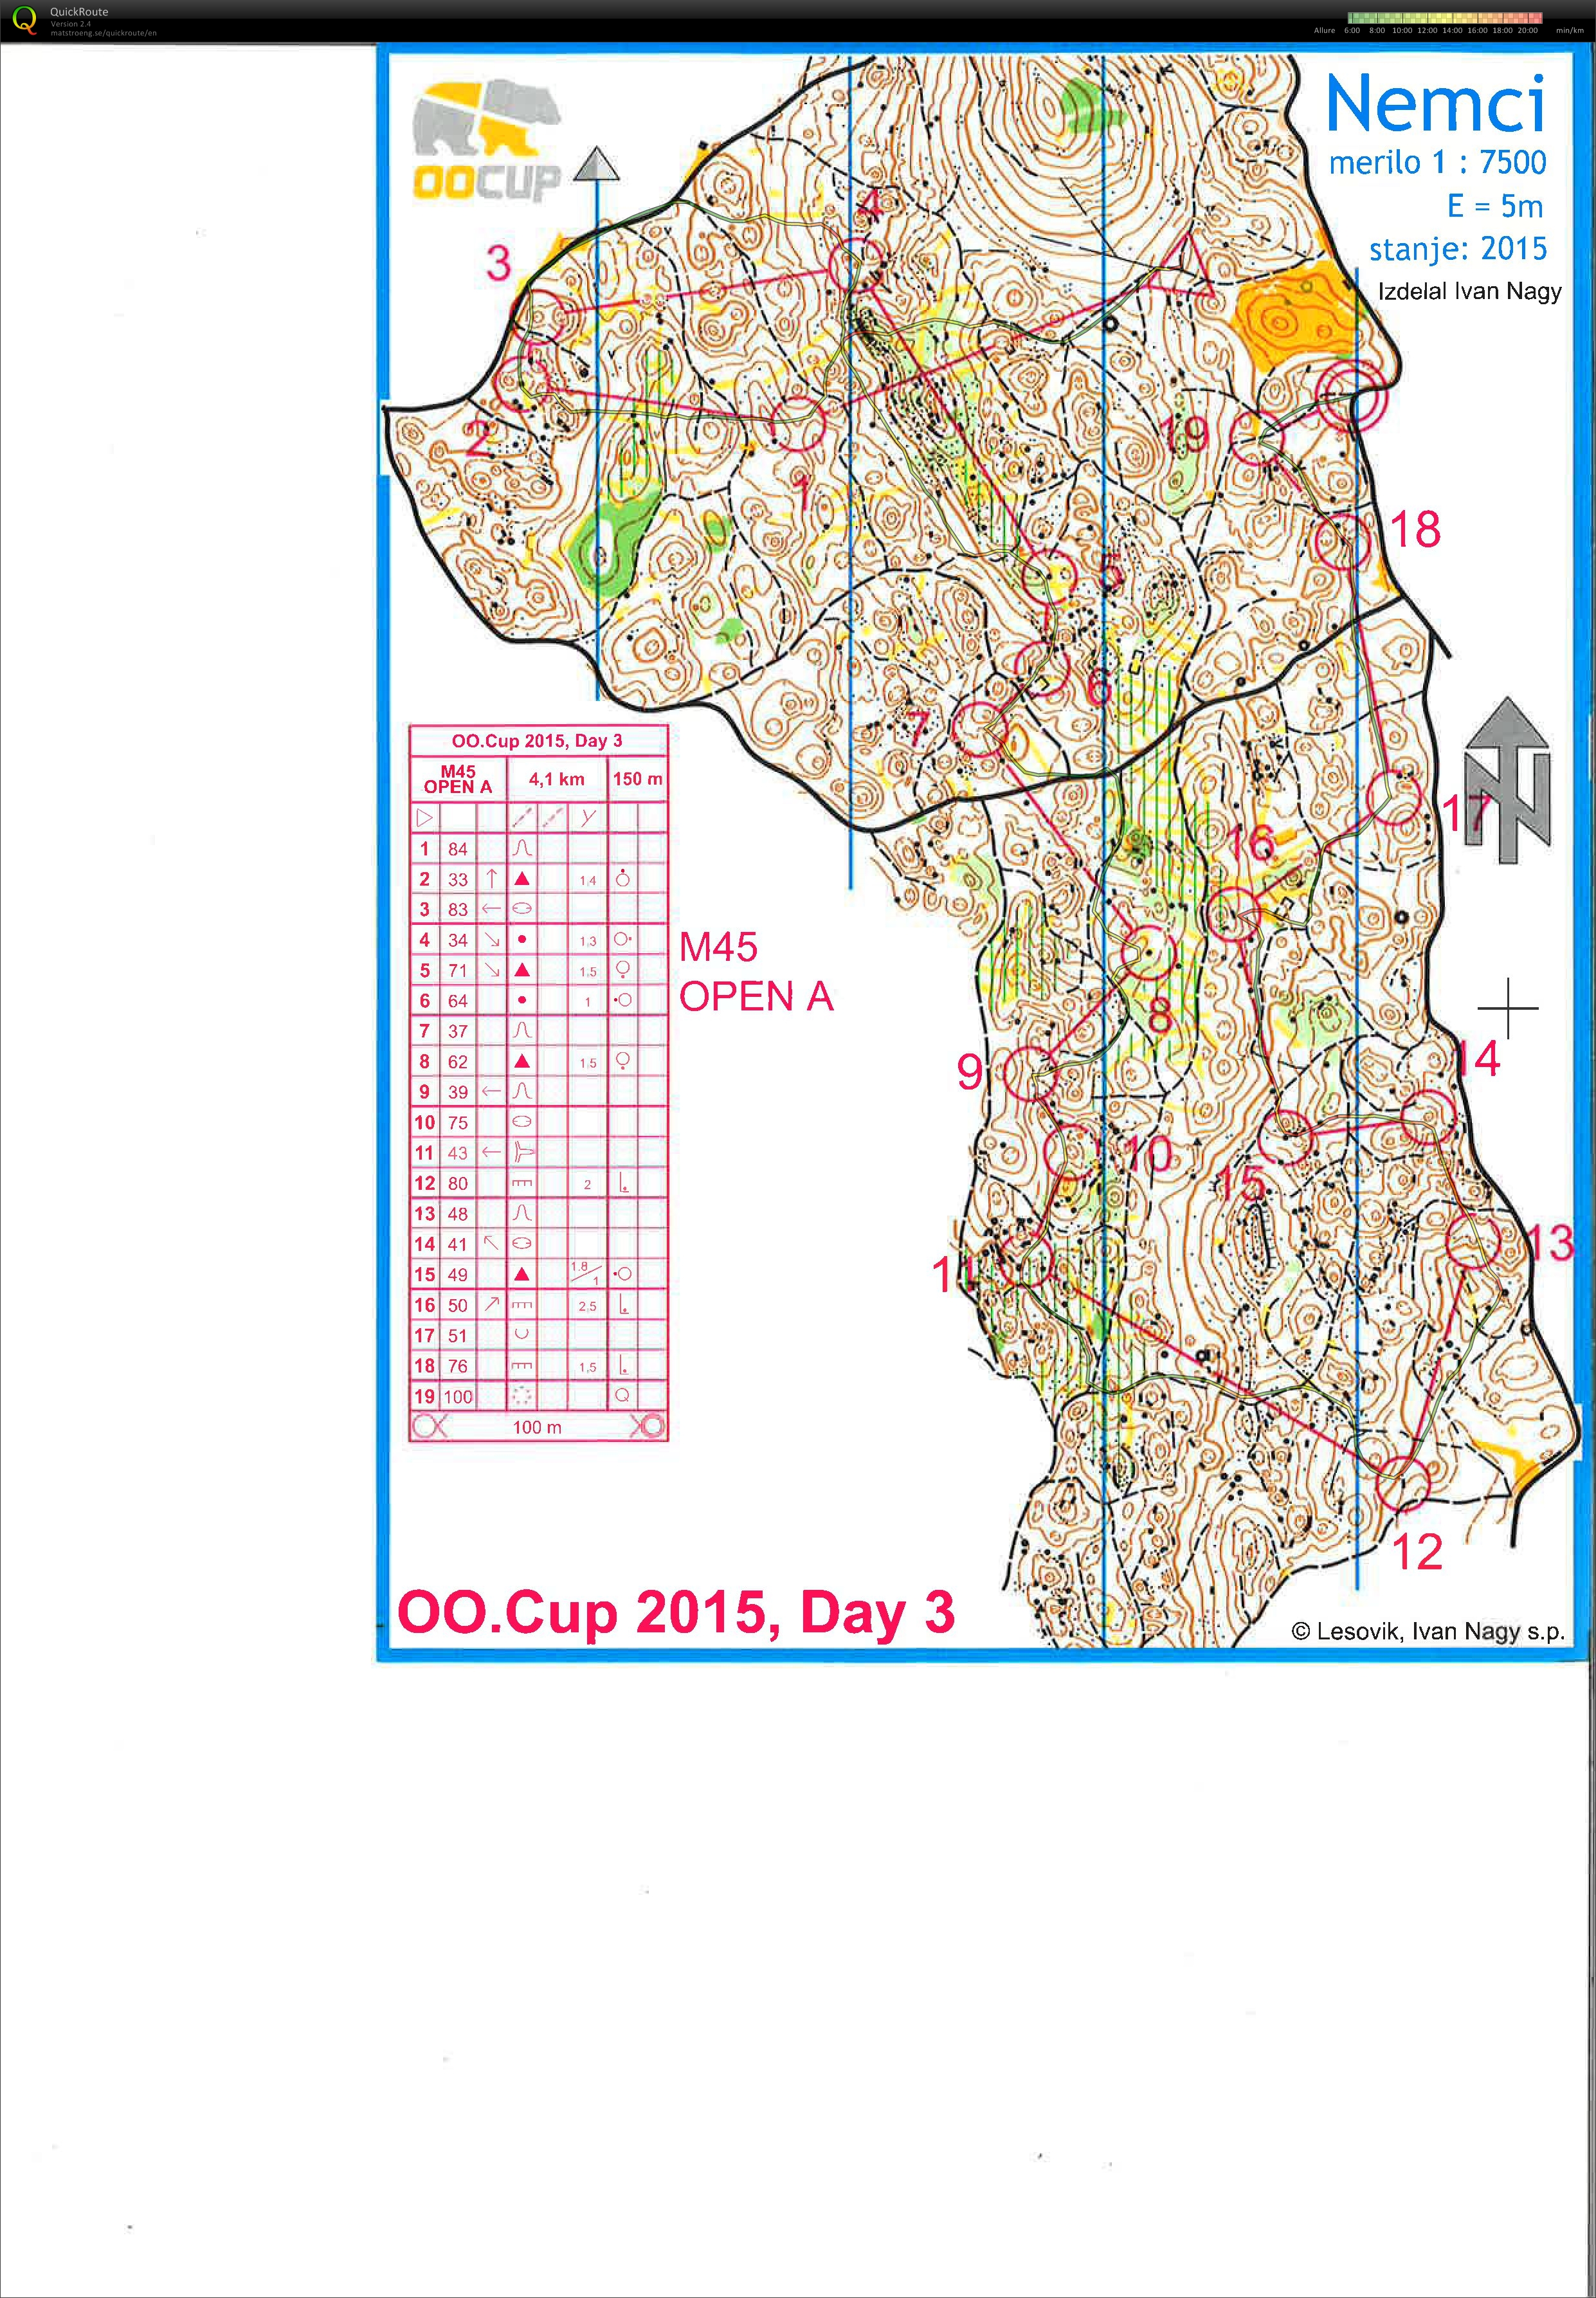 OOCup-Day3 (27/07/2015)